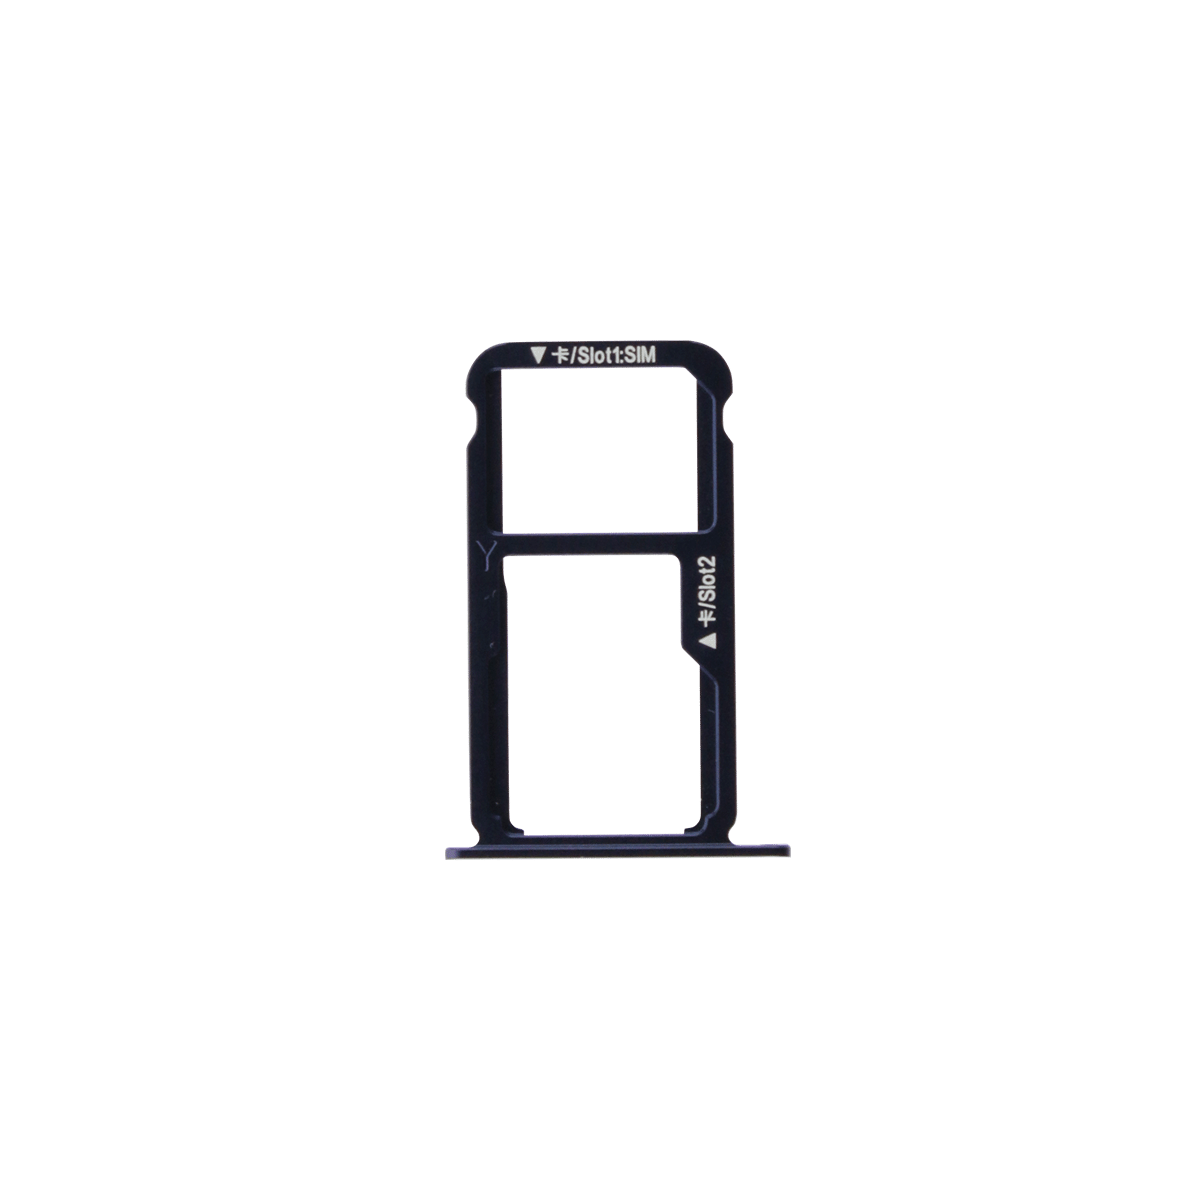 Huawei Honor 8 SIM Card Tray Replacement